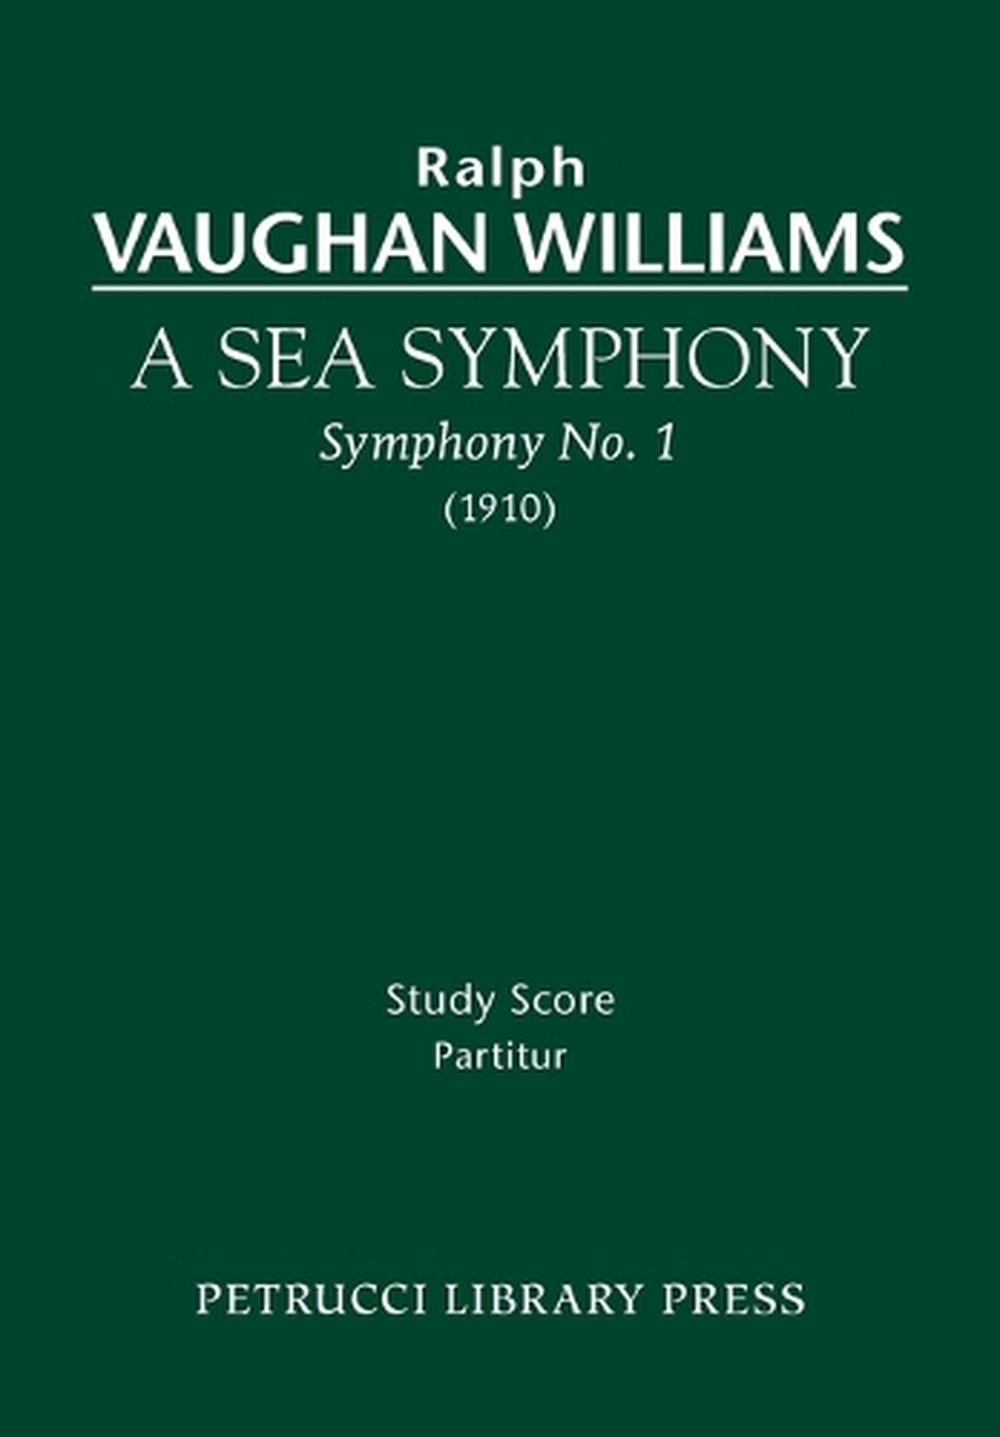 A Sea Symphony - Study Score by Ralph Vaughan Williams (English ...